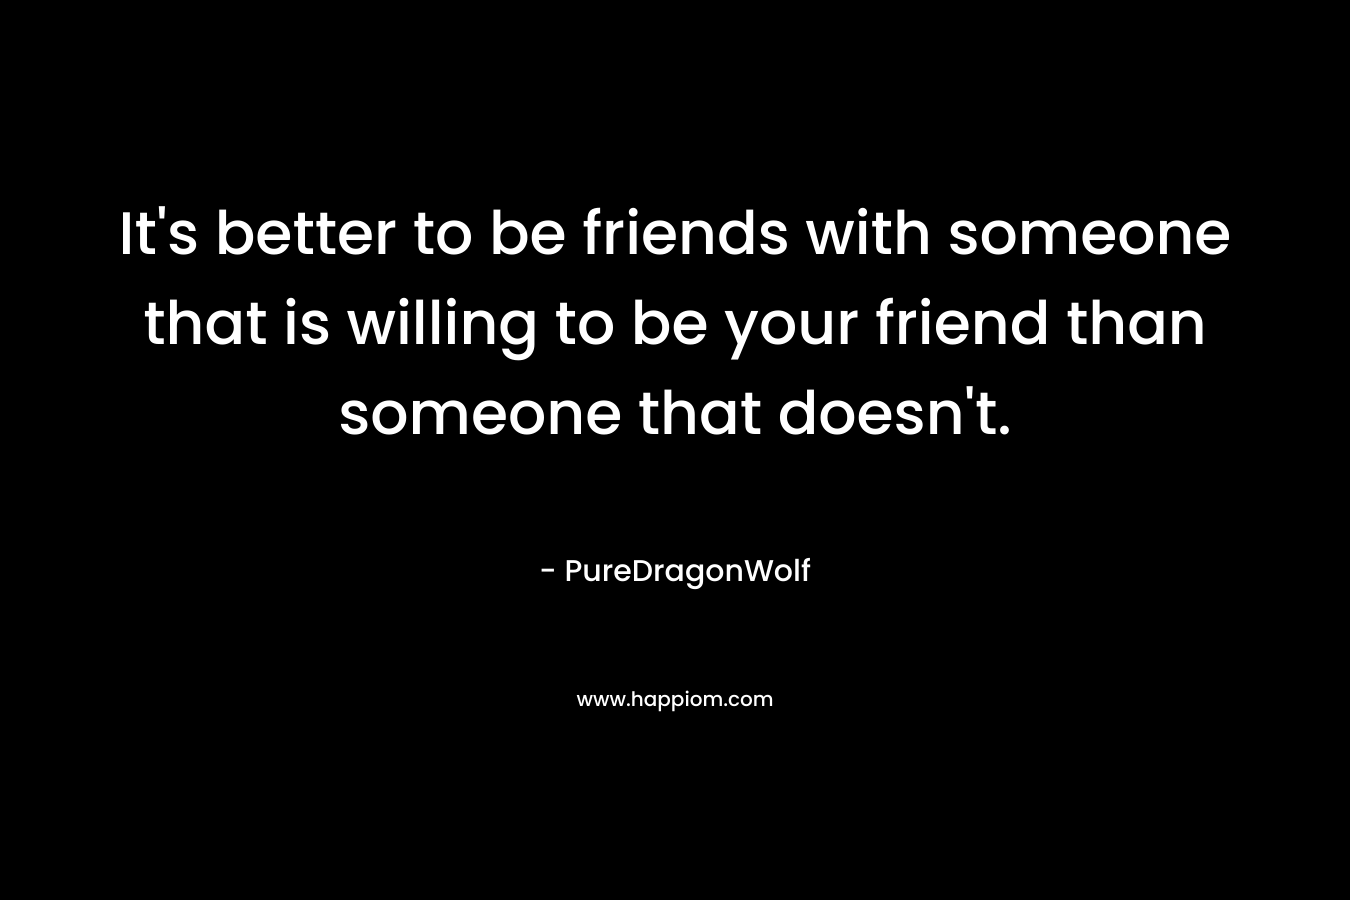 It’s better to be friends with someone that is willing to be your friend than someone that doesn’t. – PureDragonWolf